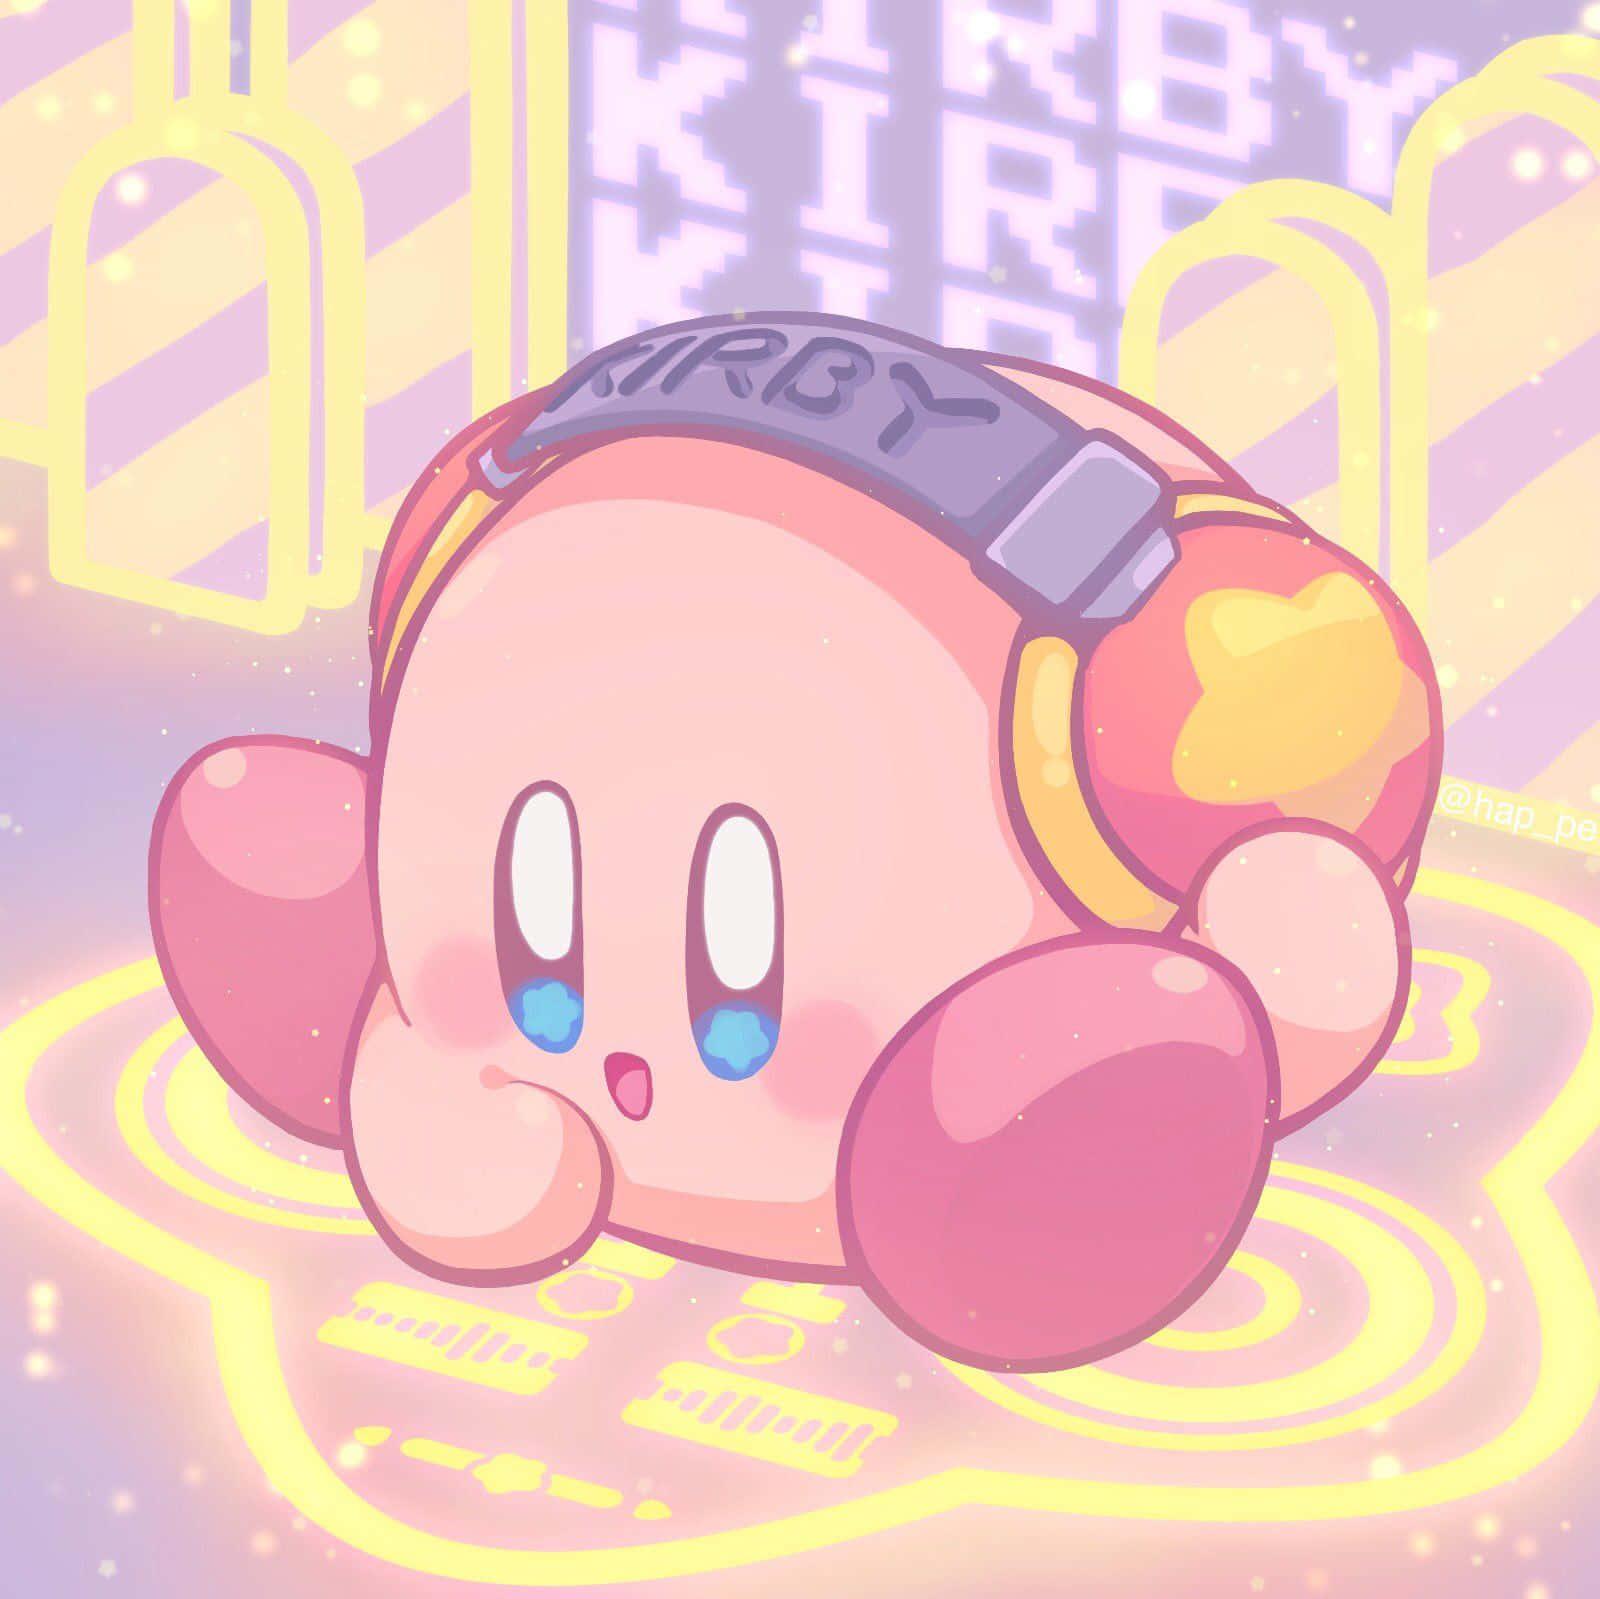 Download Have a fun time with Kirby the lovable pink creature